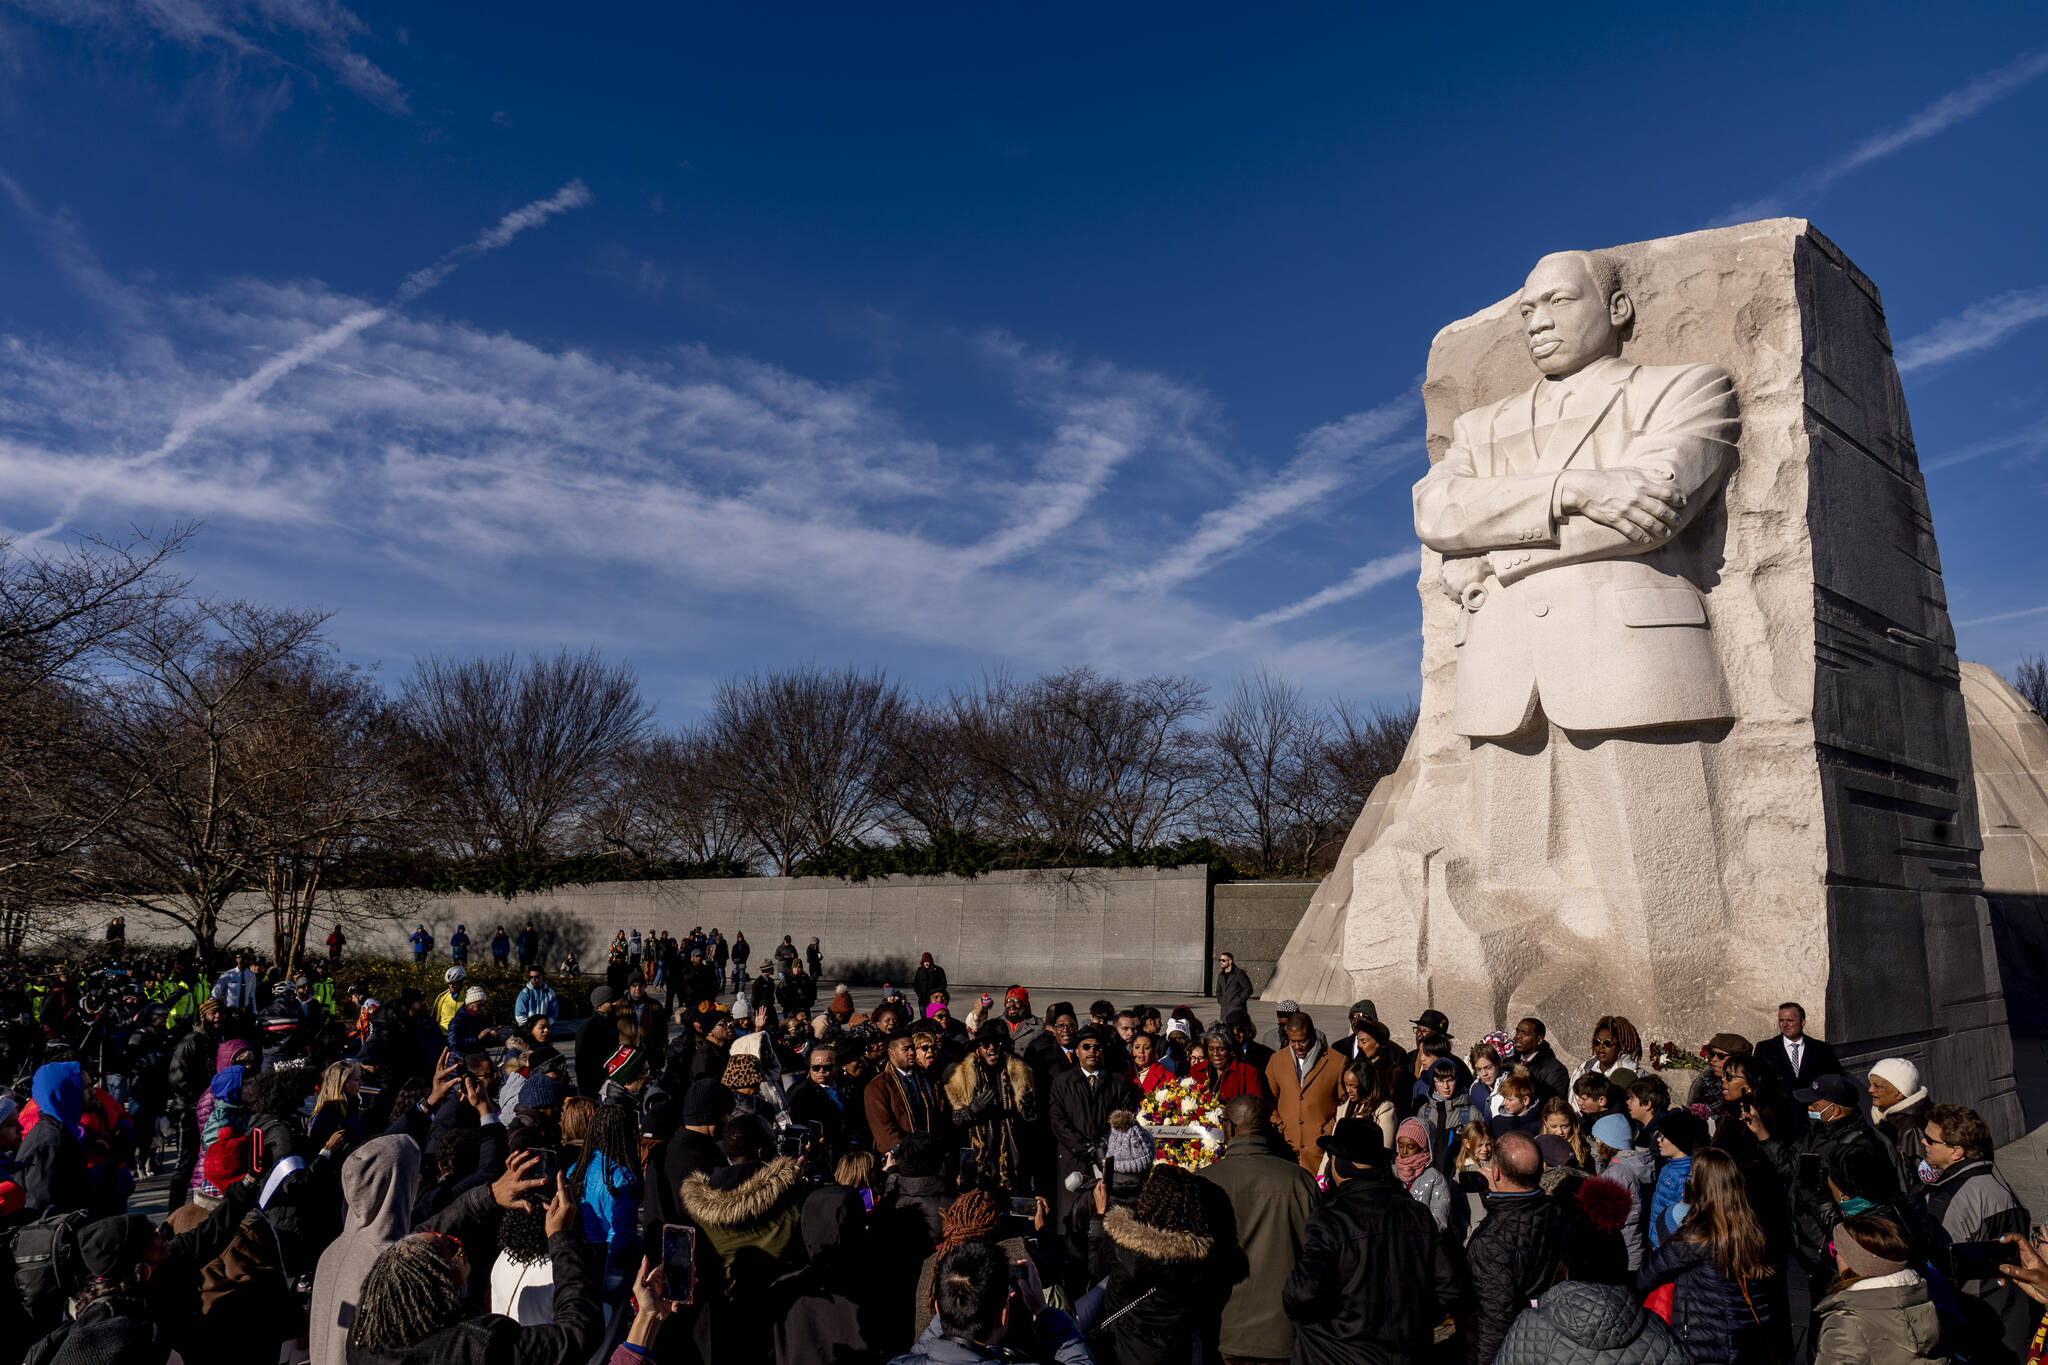 A large group gathers to watch a wreath-laying ceremony at the Martin Luther King Jr. Memorial on Martin Luther King Jr. Day in Washington, Monday, Jan. 16, 2023. (AP Photo / Andrew Harnik)